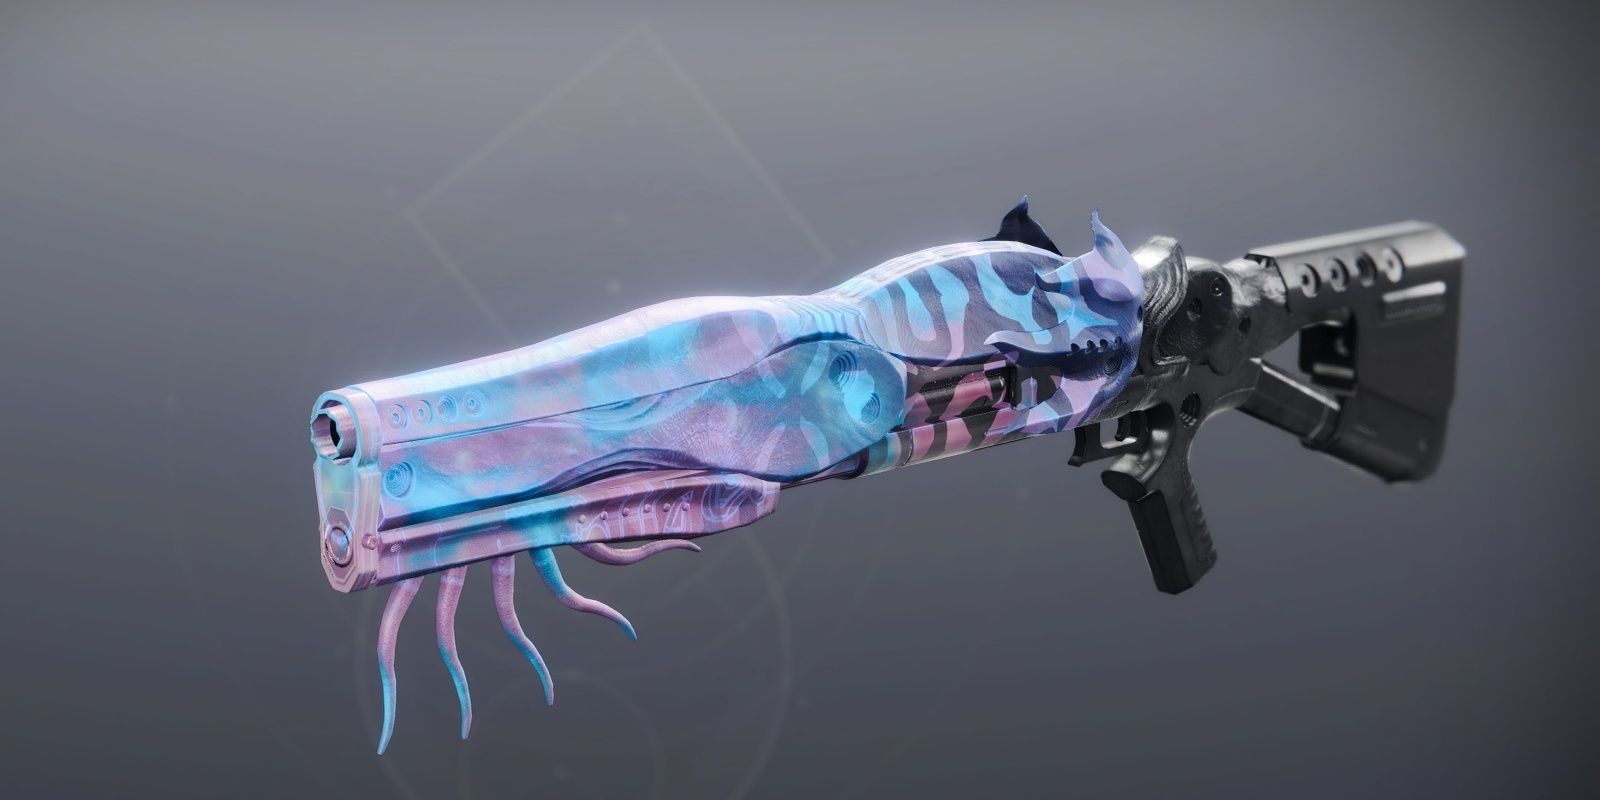 The shotgun, Nessa's Oblation glowing with pink and blue accents on a gray background.